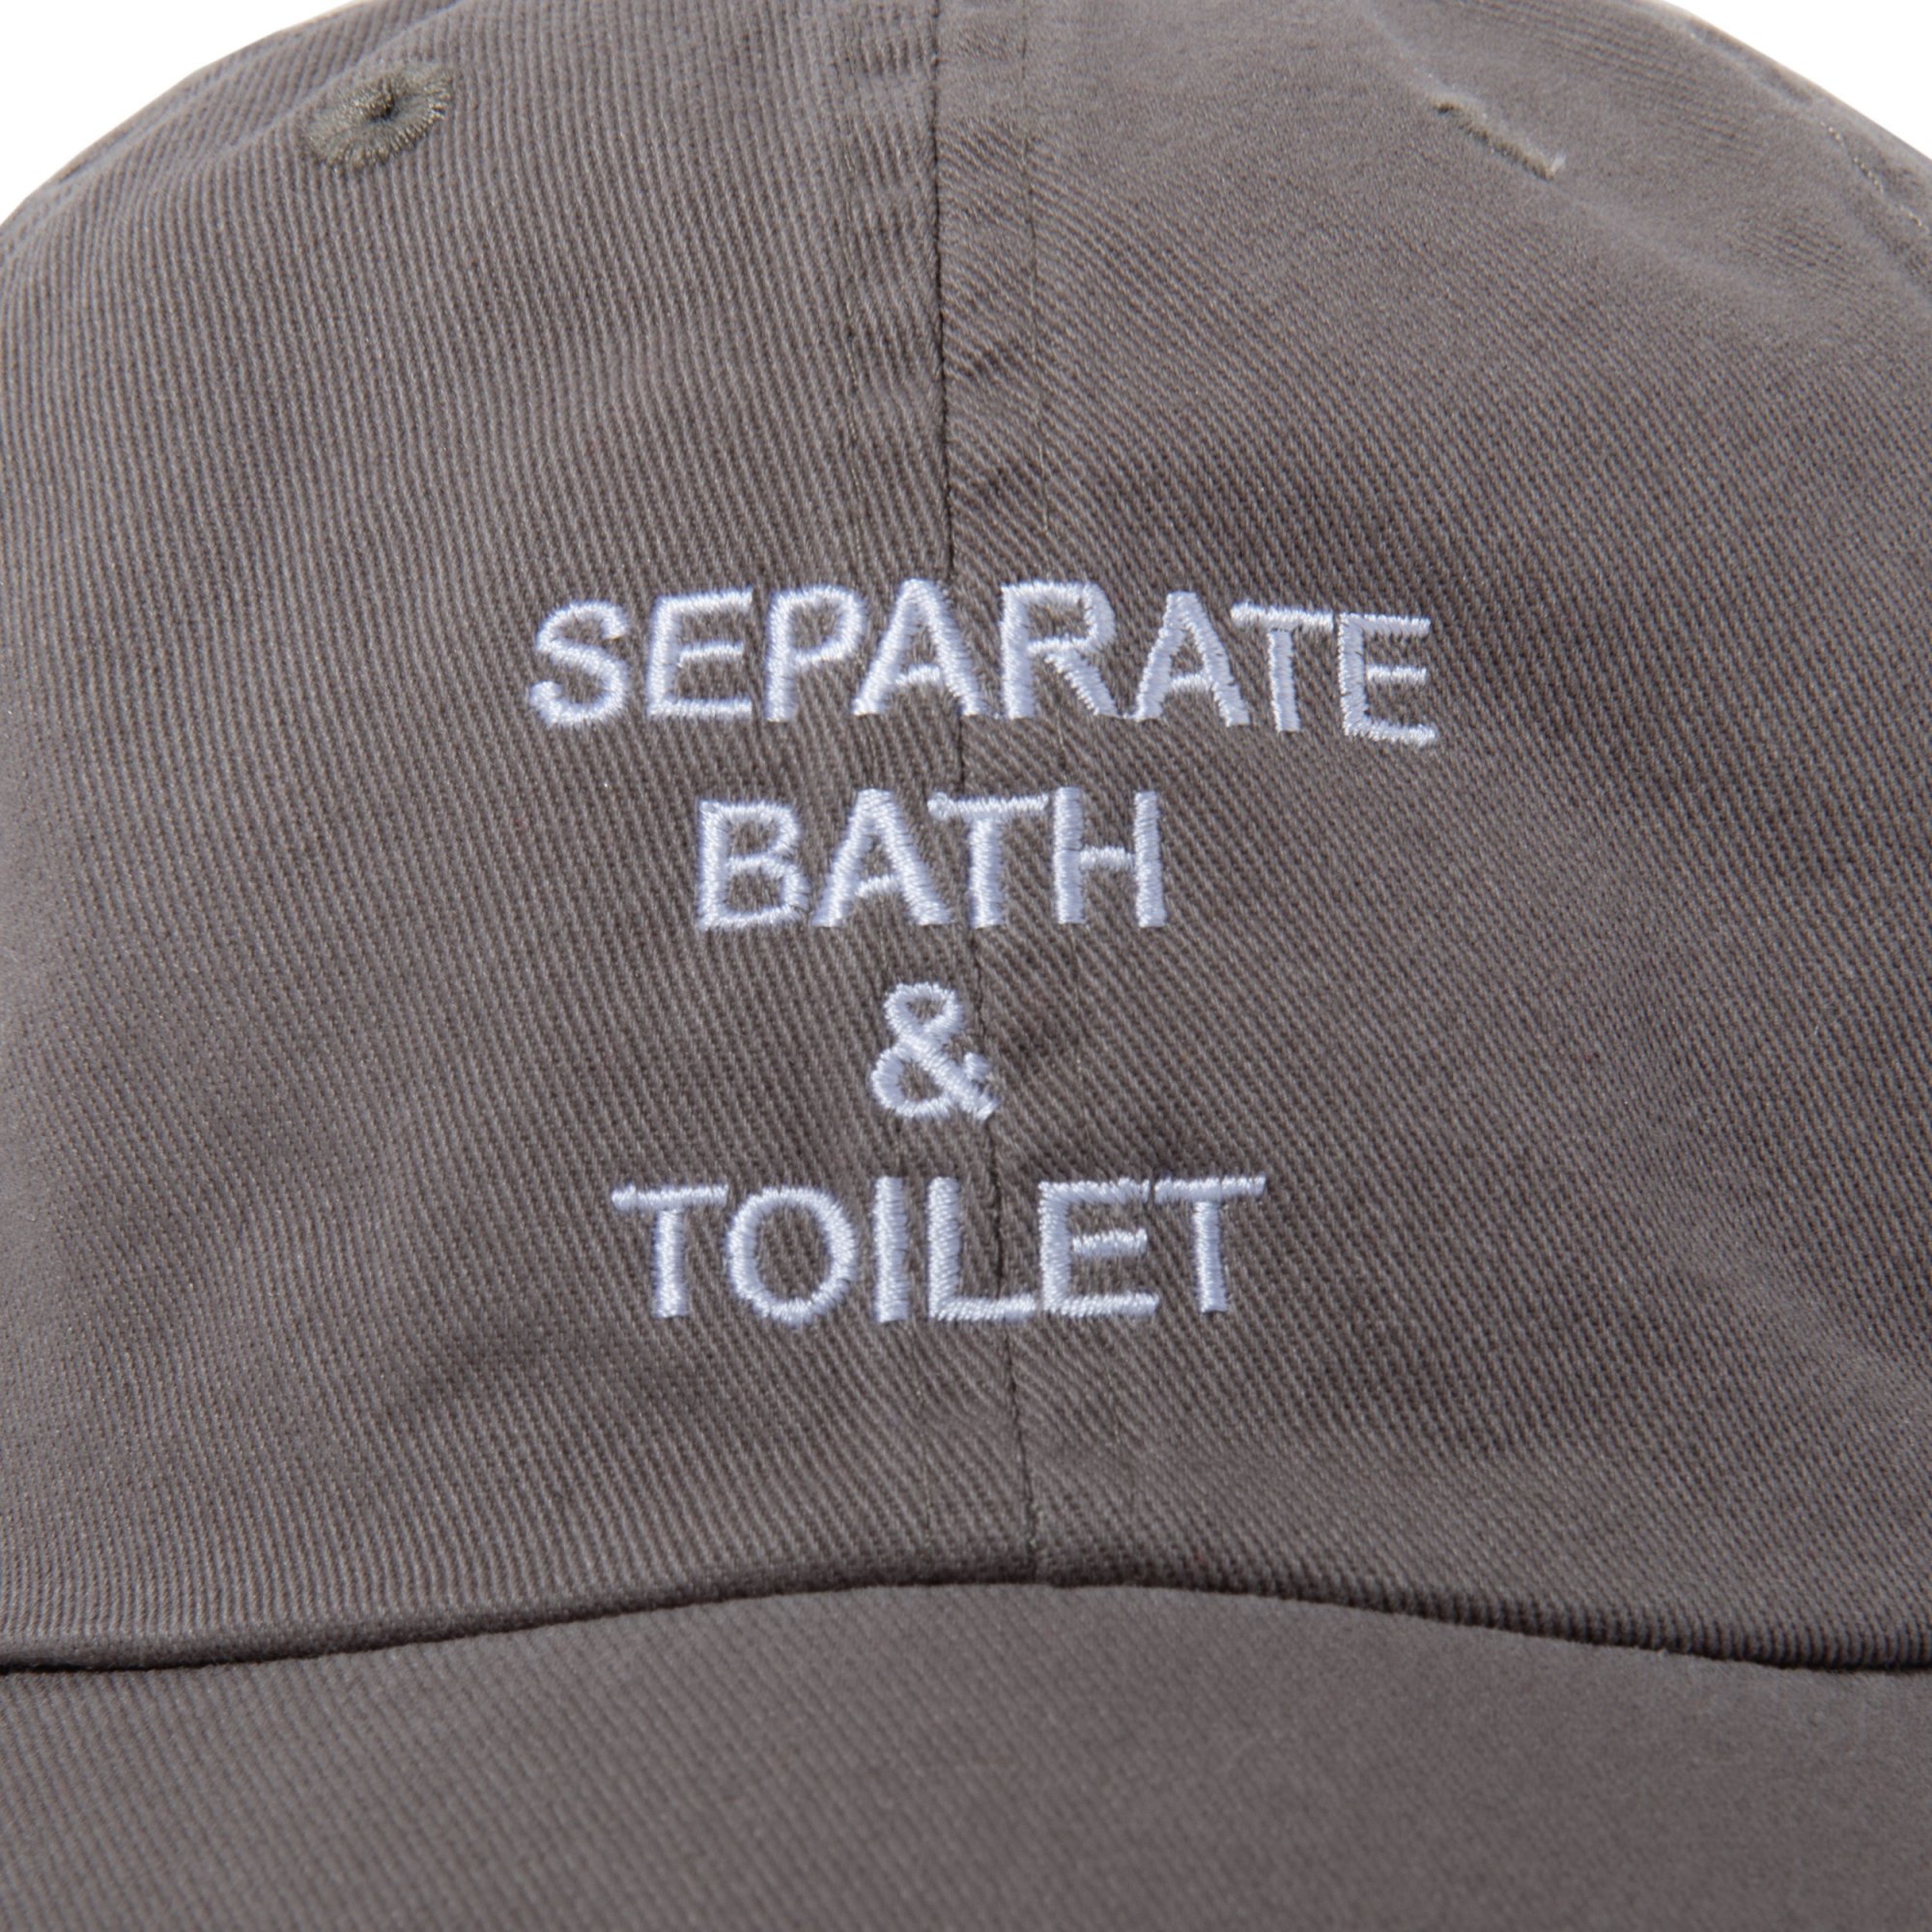 SEPARATE BATH & TOILET<br />6PANNEL CAP2 / GRAY<img class='new_mark_img2' src='https://img.shop-pro.jp/img/new/icons14.gif' style='border:none;display:inline;margin:0px;padding:0px;width:auto;' />